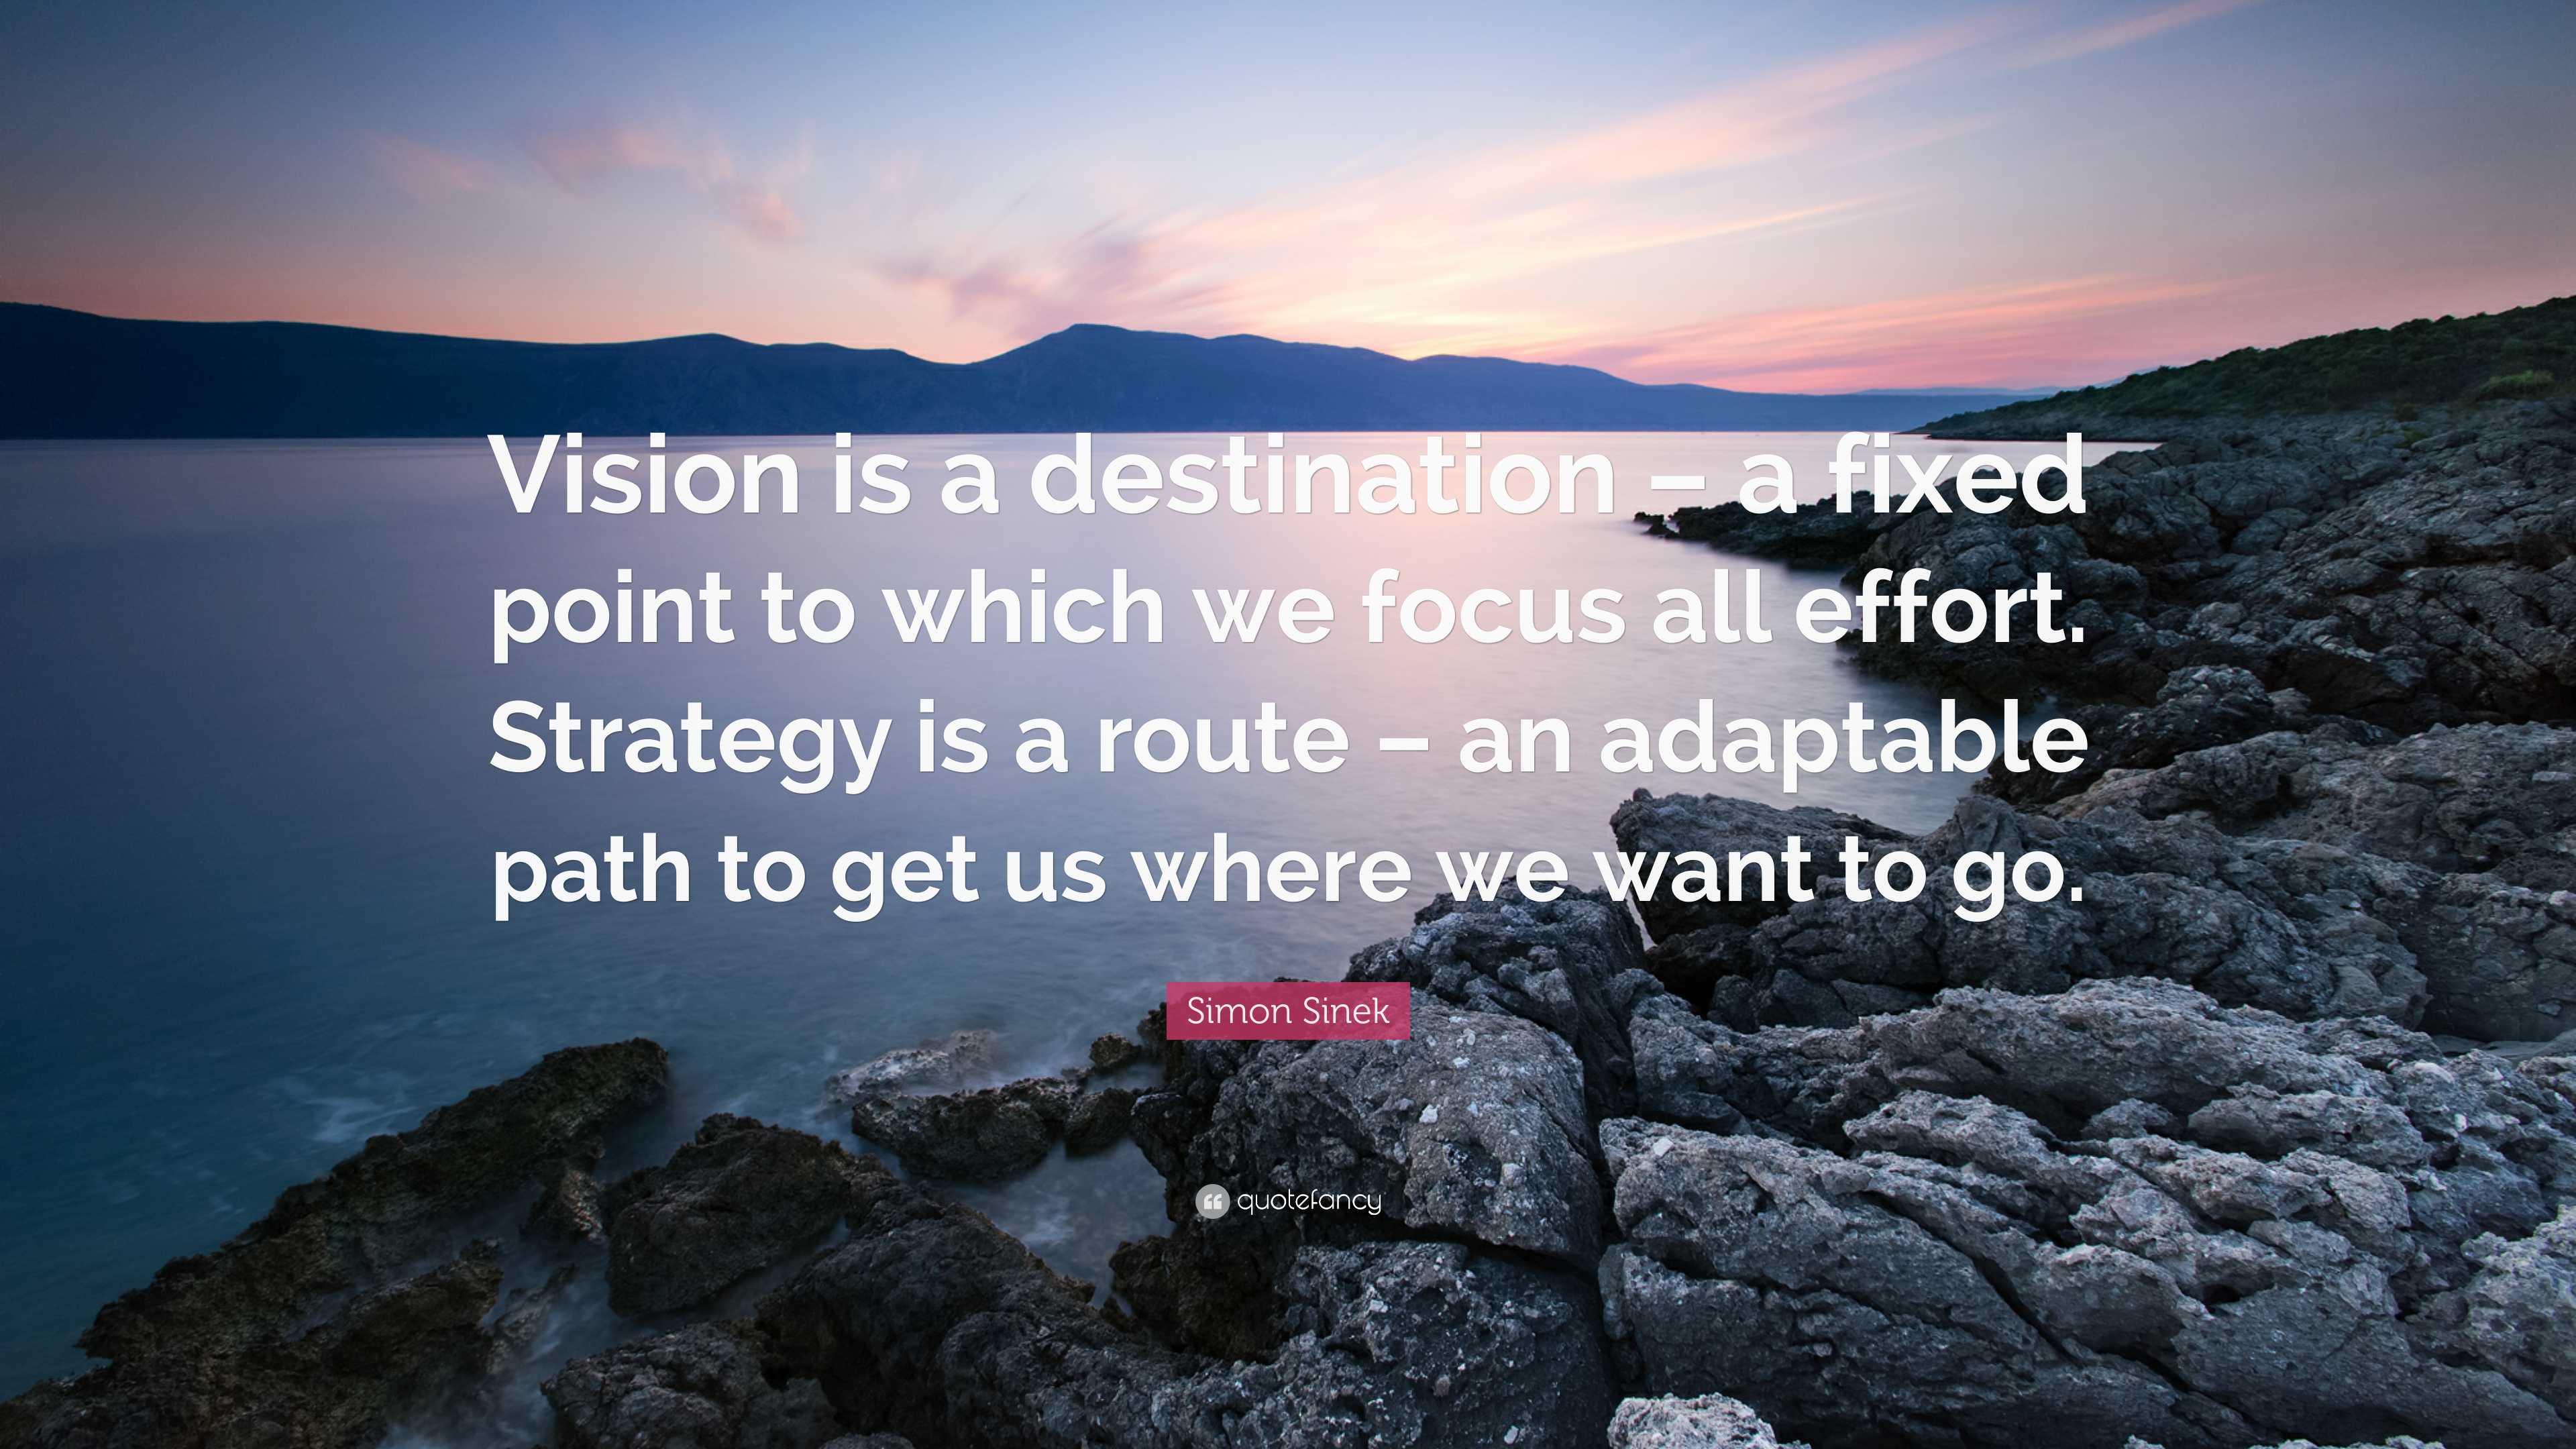 Vision is a destination – a fixed point to which we focus